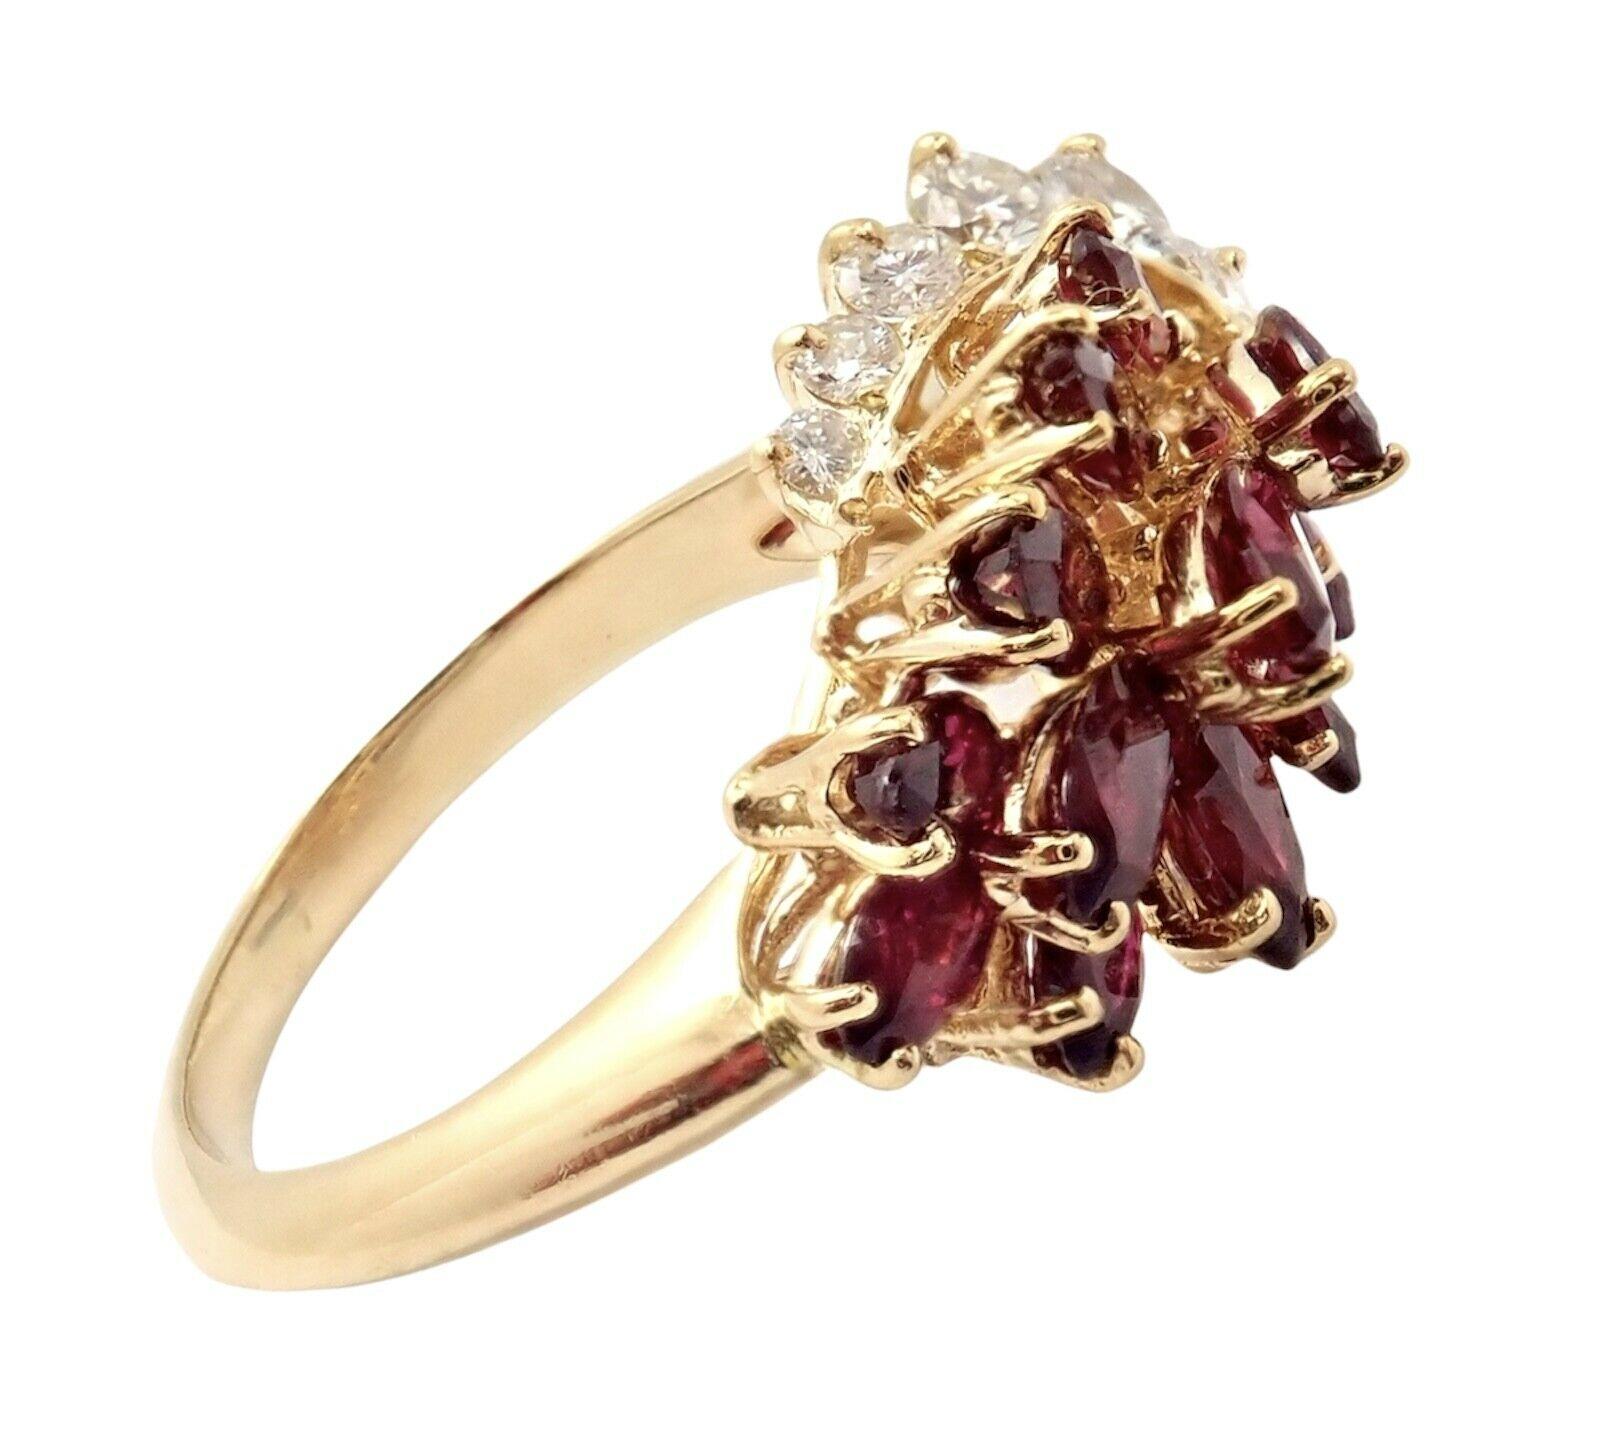 18k Yellow Gold Diamond And Ruby Cocktail Ring by Piaget. 
With 11 brilliant round diamonds VS1 clarity, G color total weight approximtely 0.70ct
12 marquise rubies 1.50ctw
Details: 
Weight: 6 grams
Width: 8mm
Ring Size: 6.5
Stamped Hallmarks: